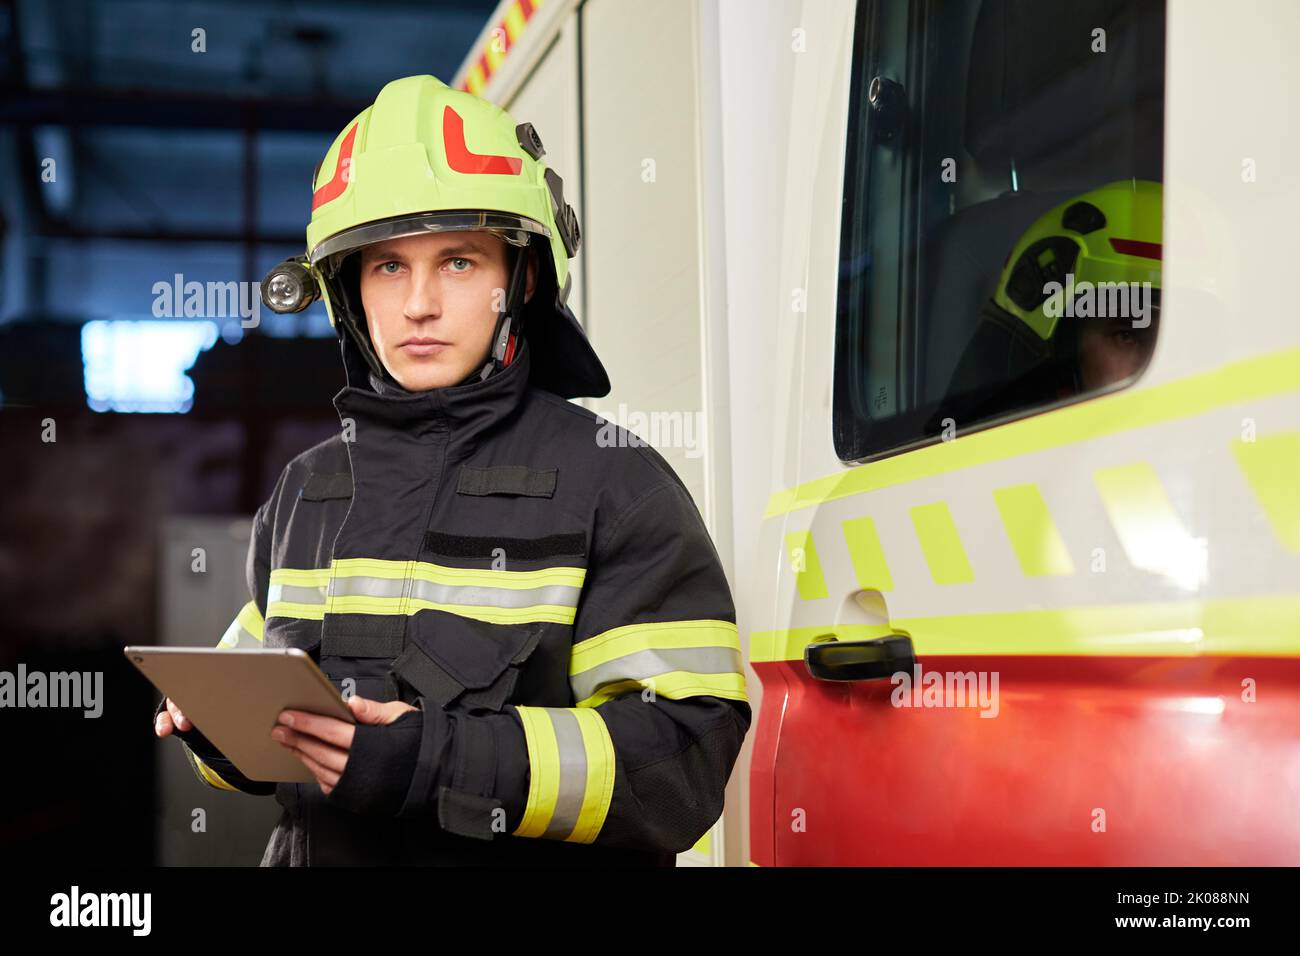 Male firefighter with tablet in uniform on car background Stock Photo